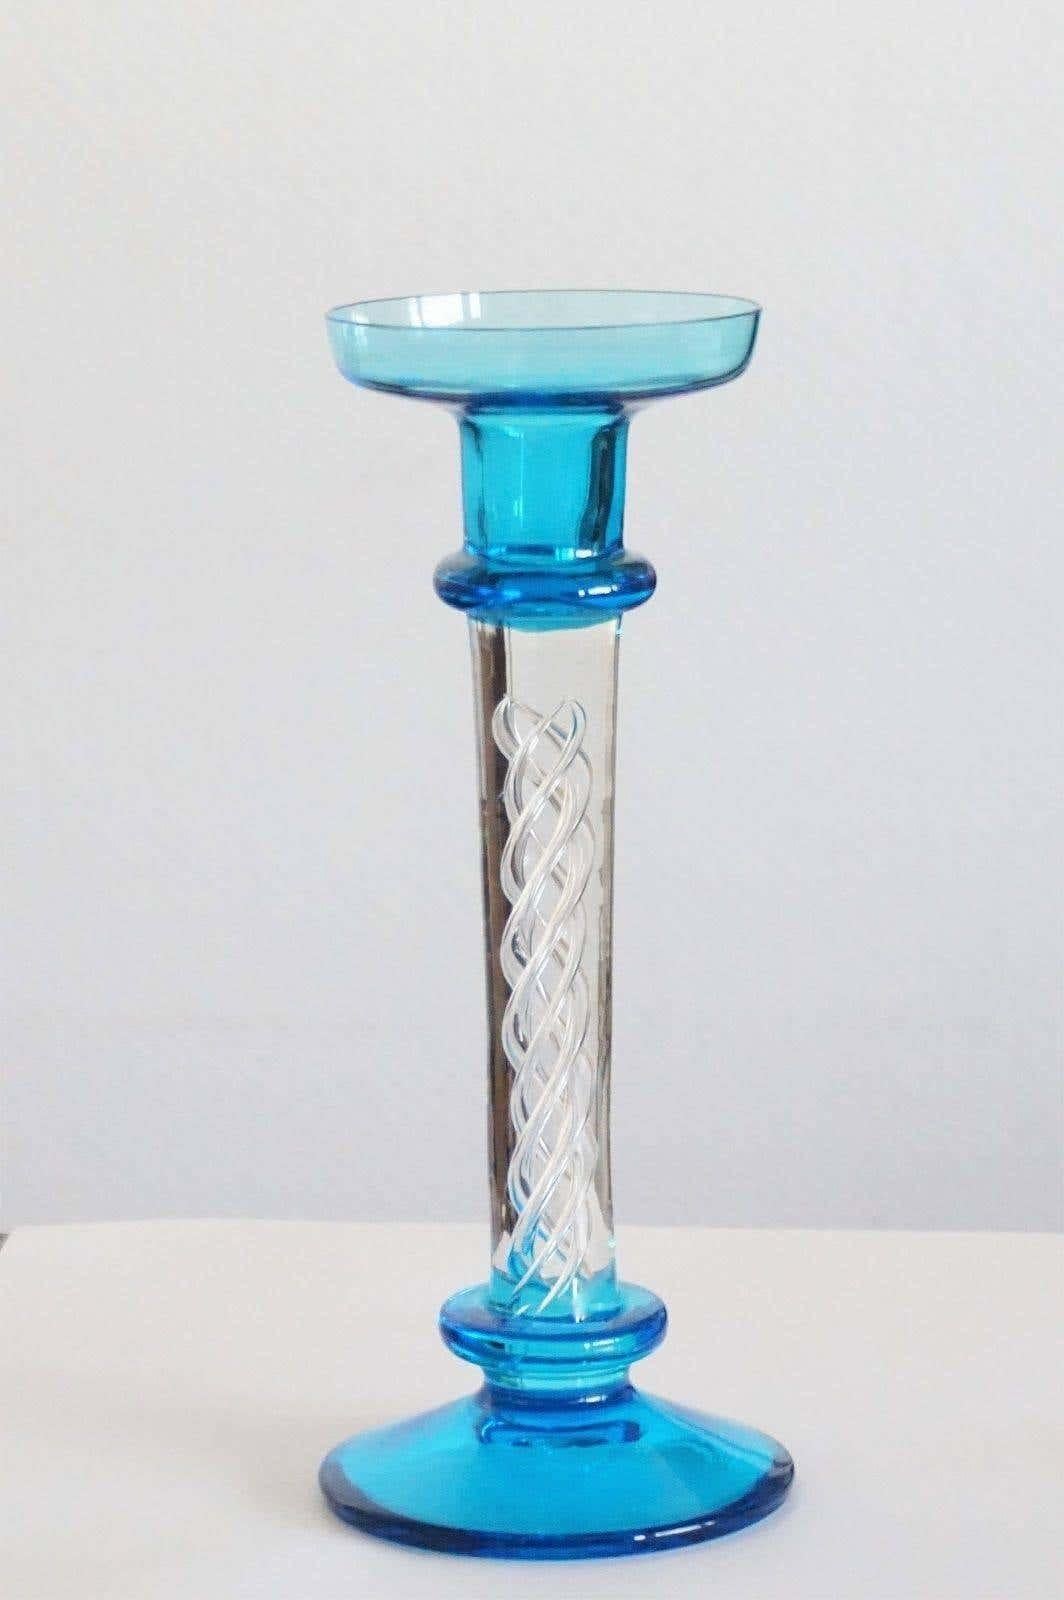 A very elegant Murano clear and turquoise glass candlestick with beautiful glass artwork inside, Italy, 1960s, without damage.
Measures: Height 9.45 in (24 cm)
Diameter/base 3.94 in (10 cm)
Diameter/top 3.35 in (8.50 cm.

